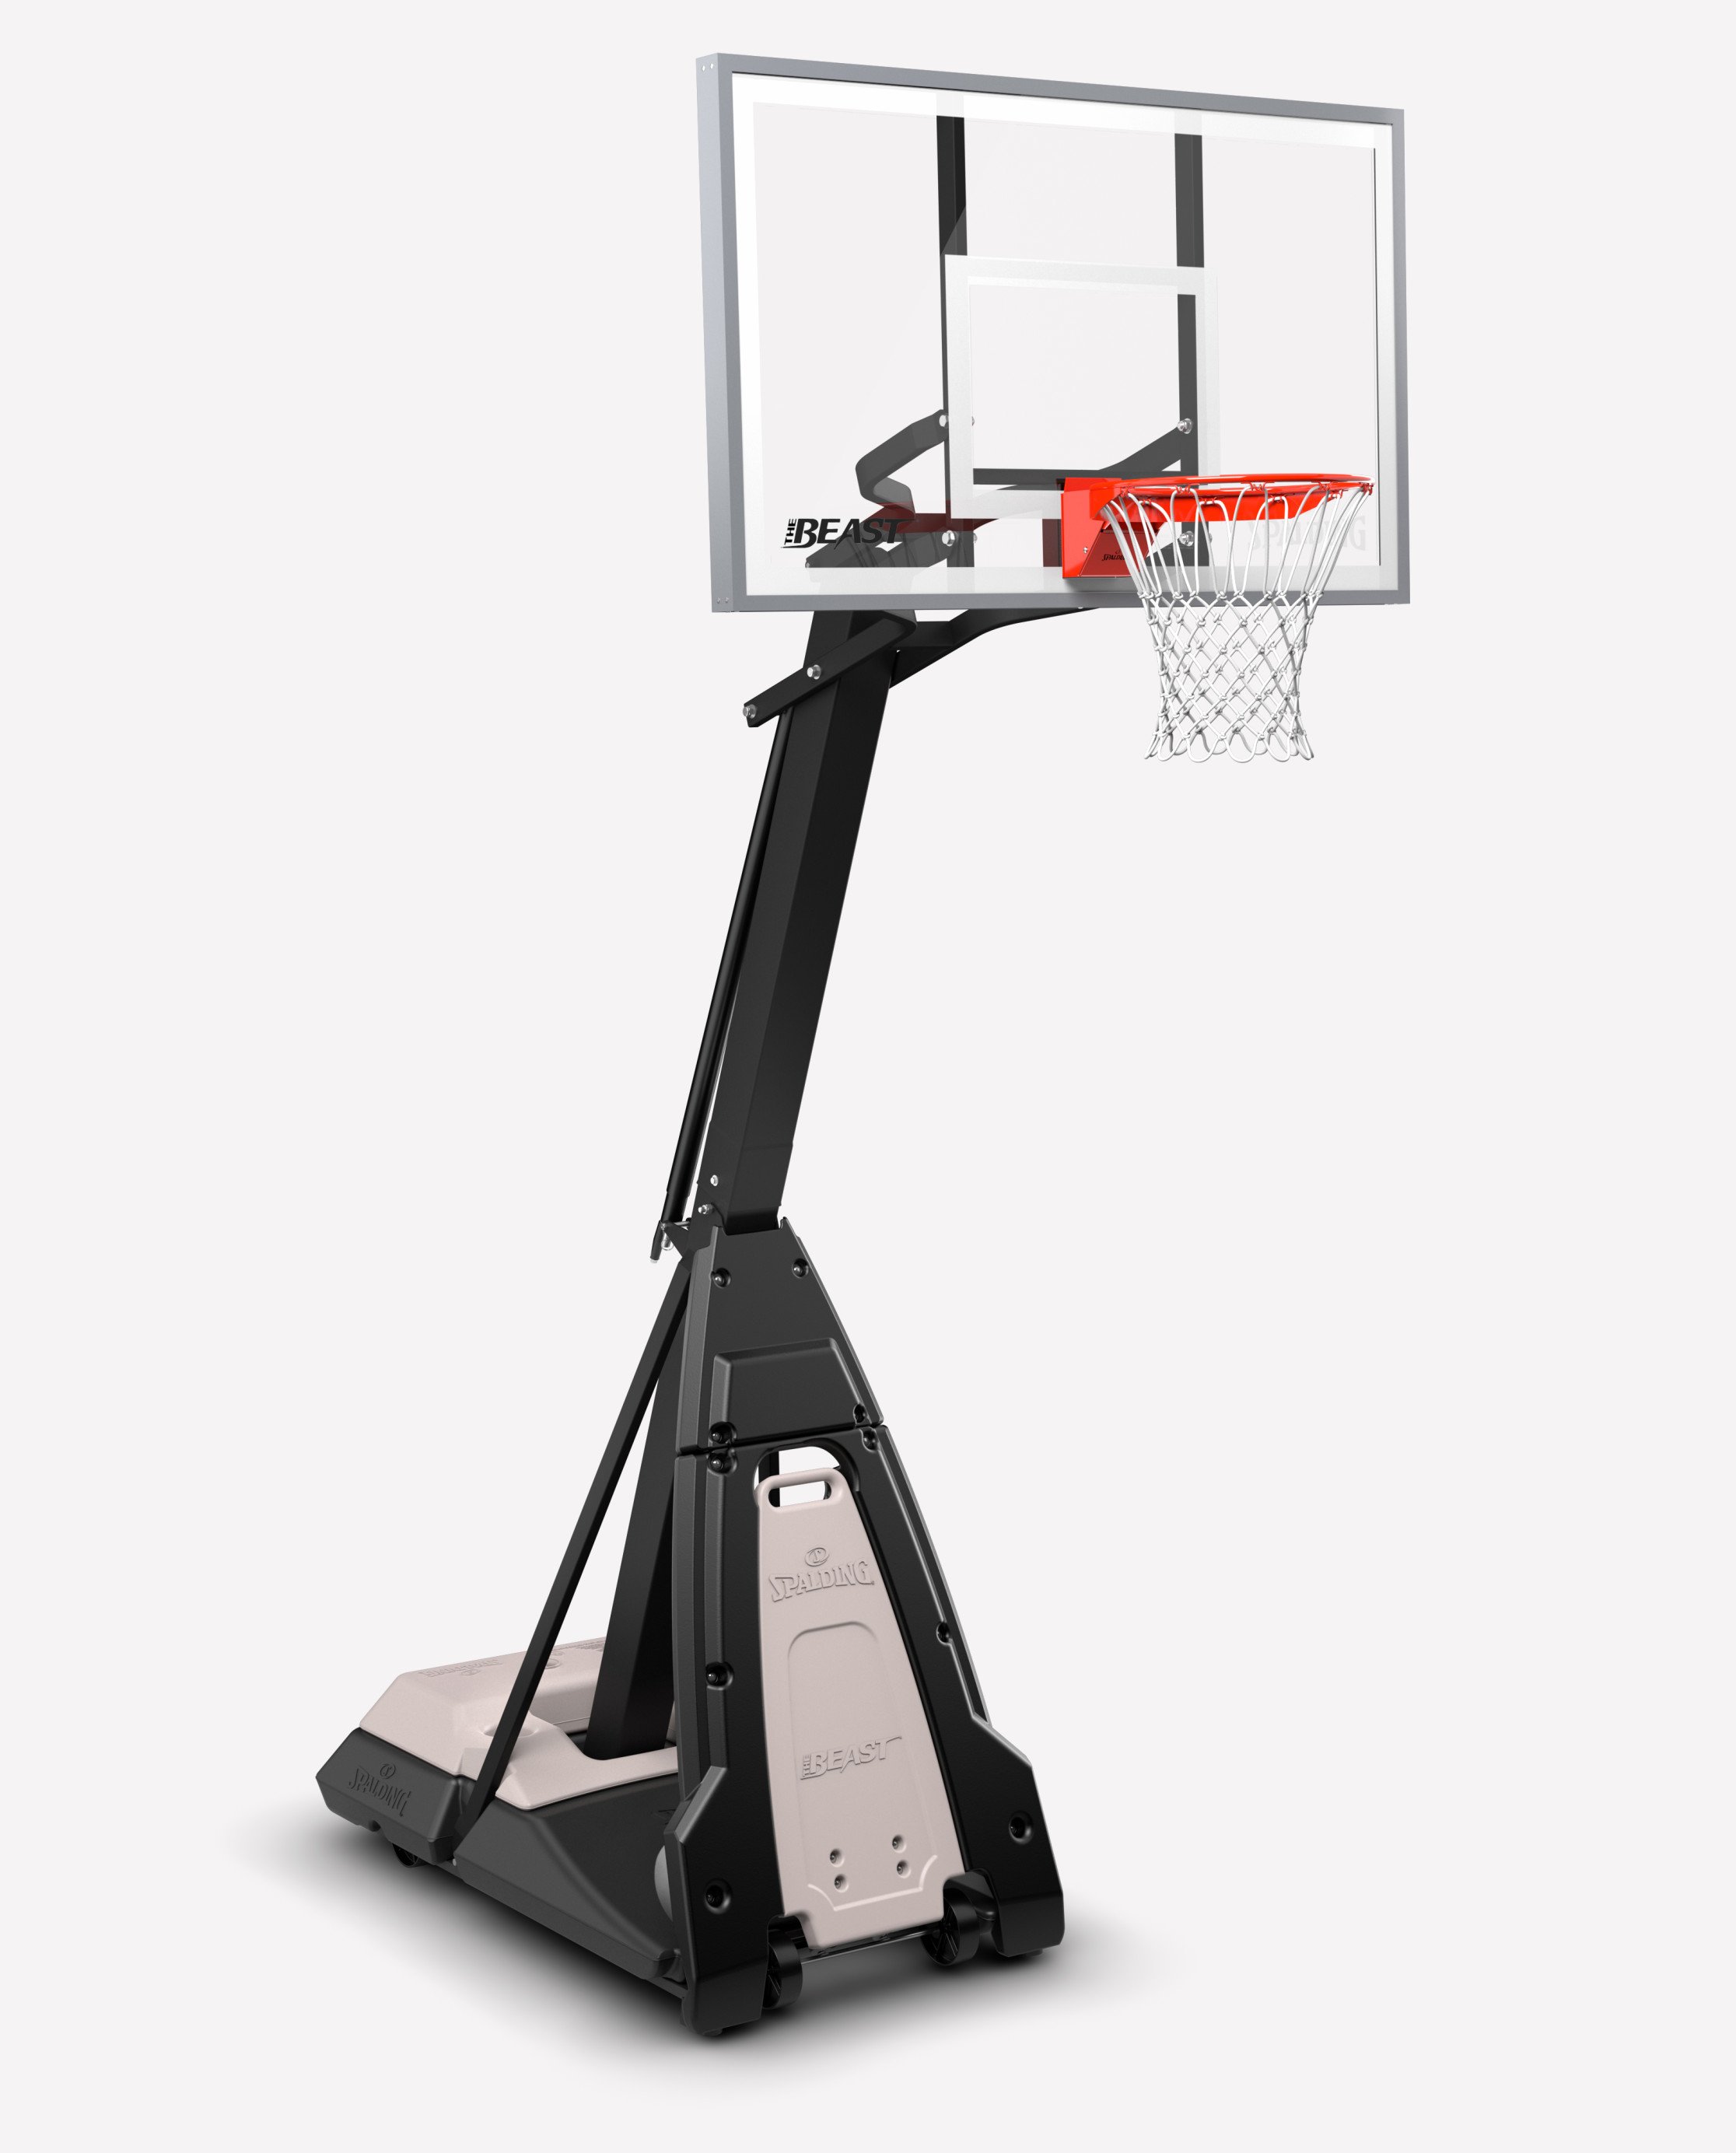 Score Big with the Best Basketball Net for Driveway: Game-Changing Power!